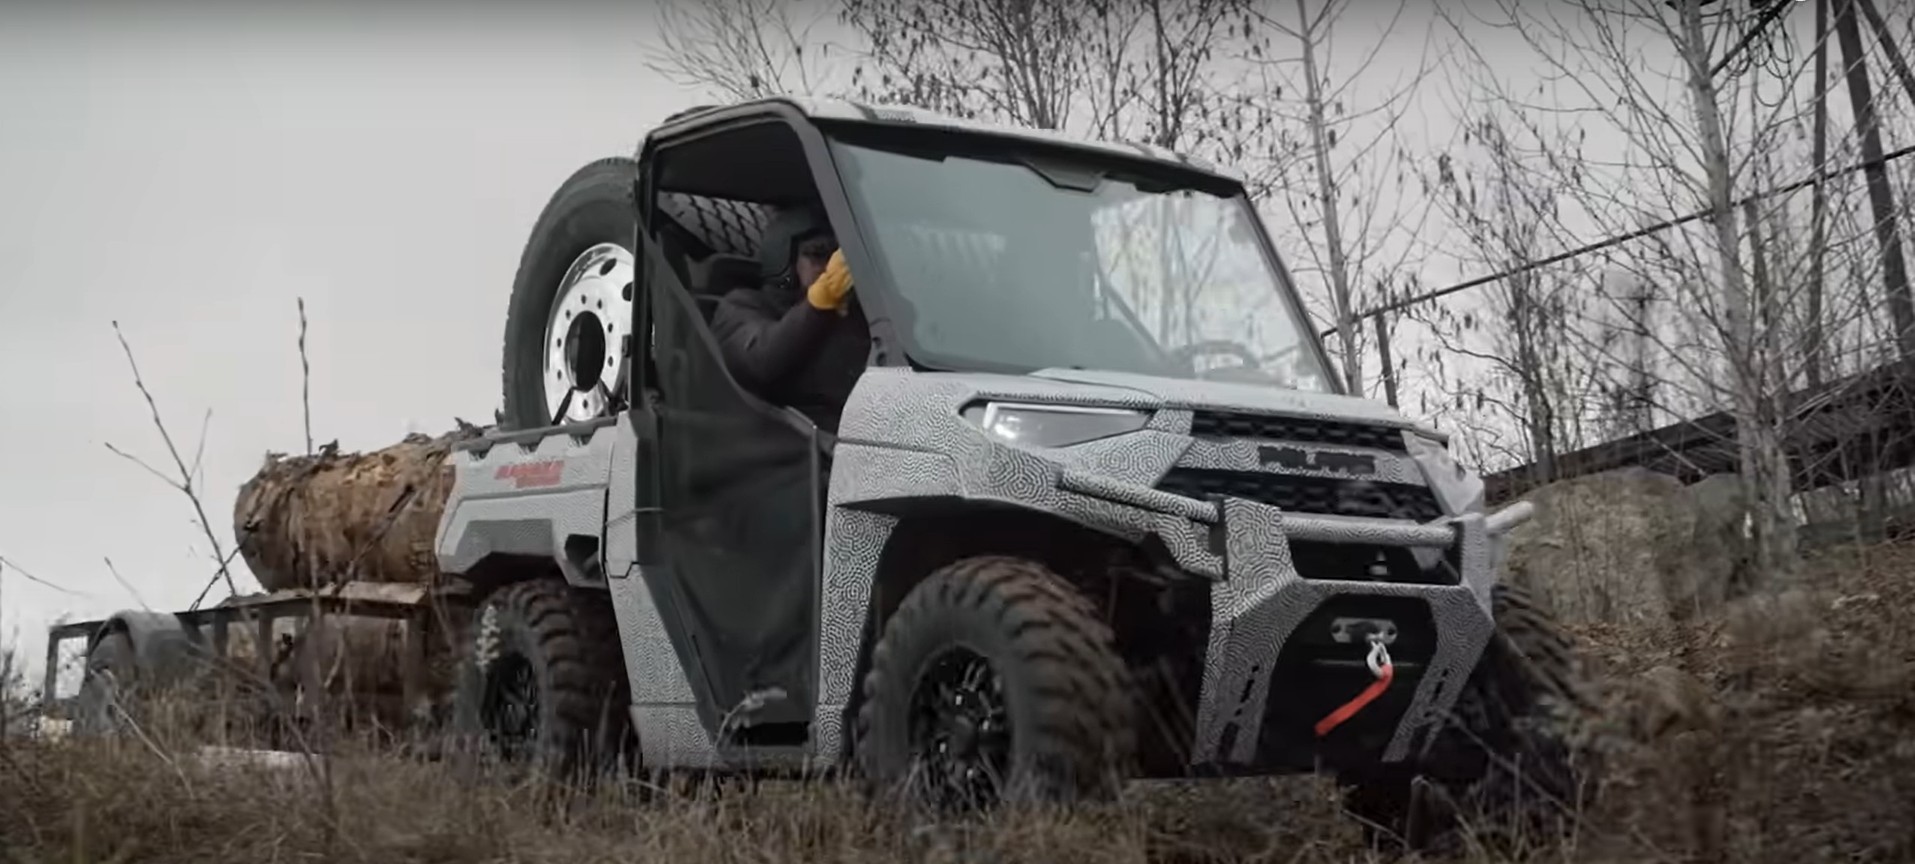 future-polaris-ranger-electric-utv-ditches-the-engine-stays-in-beast